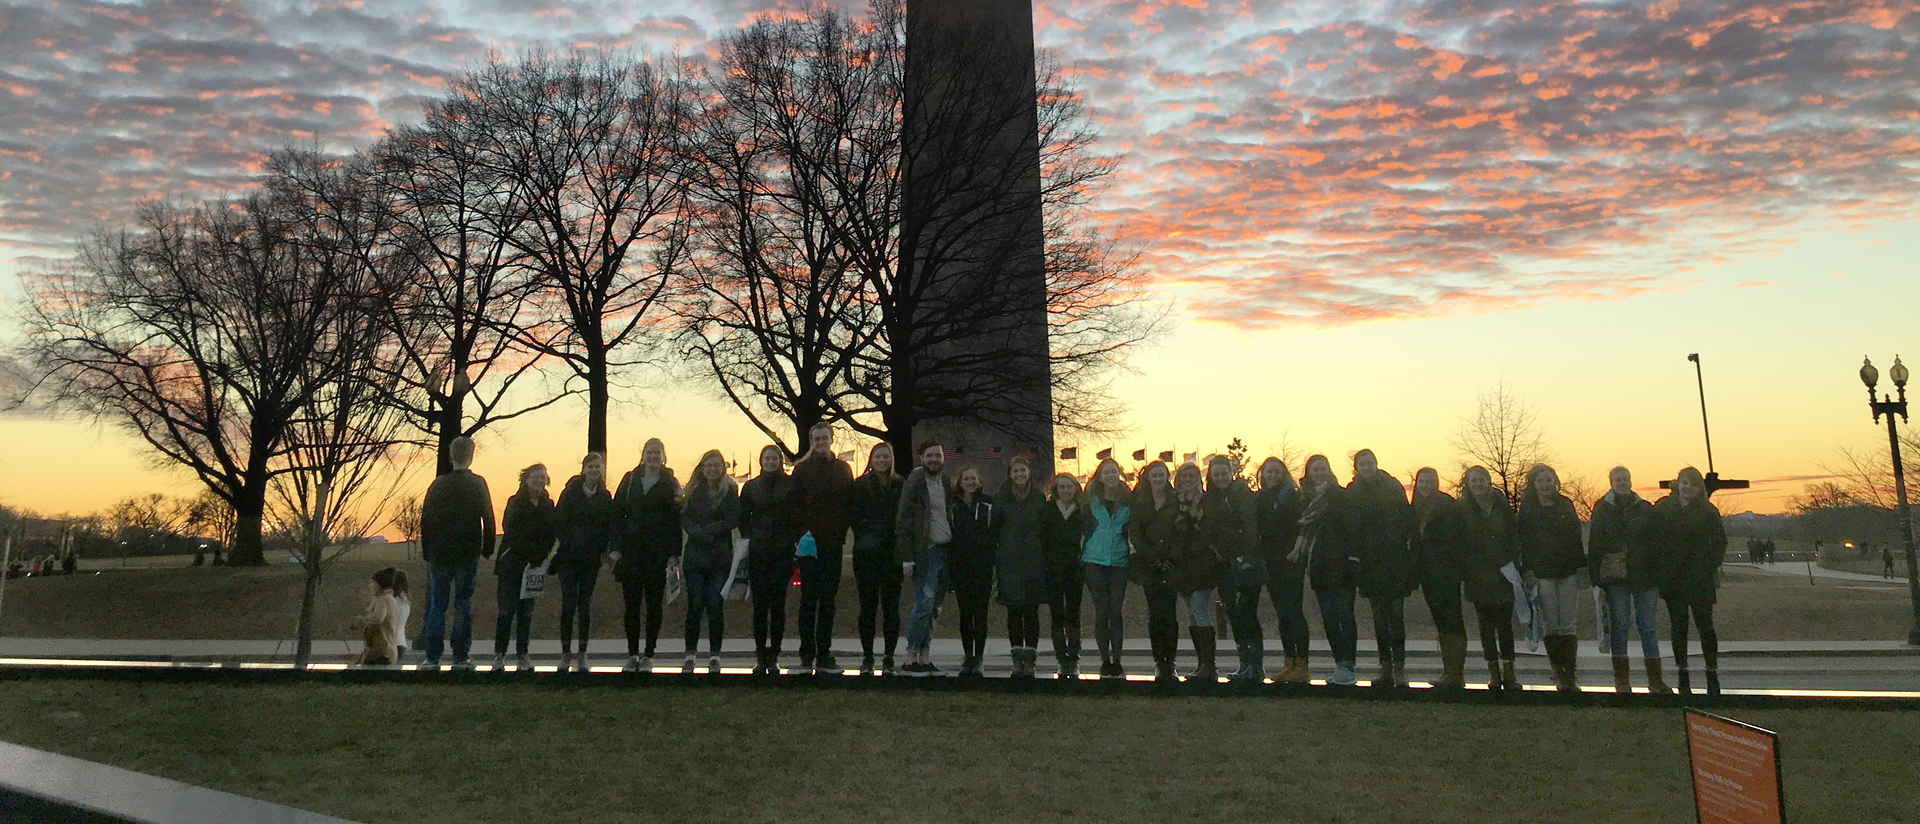 Blugolds on Winterim immersion experience in Washington, D.C.